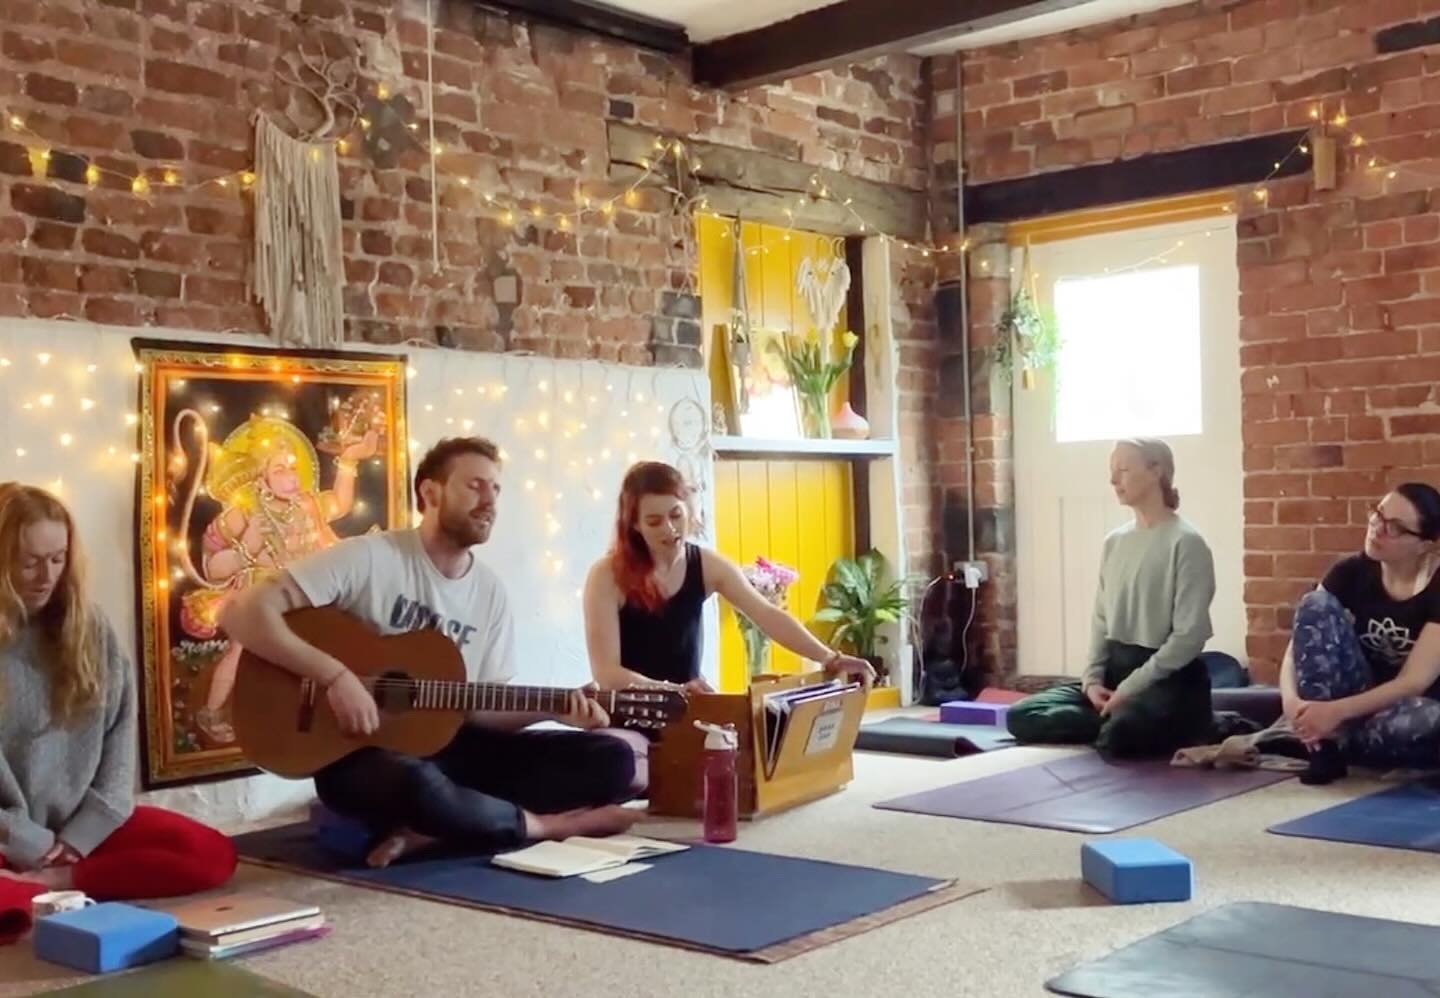 Gorgeous day yesterday - yoga with my amazing teacher @clairemissingham, plus an absolute joy to sing Baba Hanuman with the rather excellent @john_dhali 💜